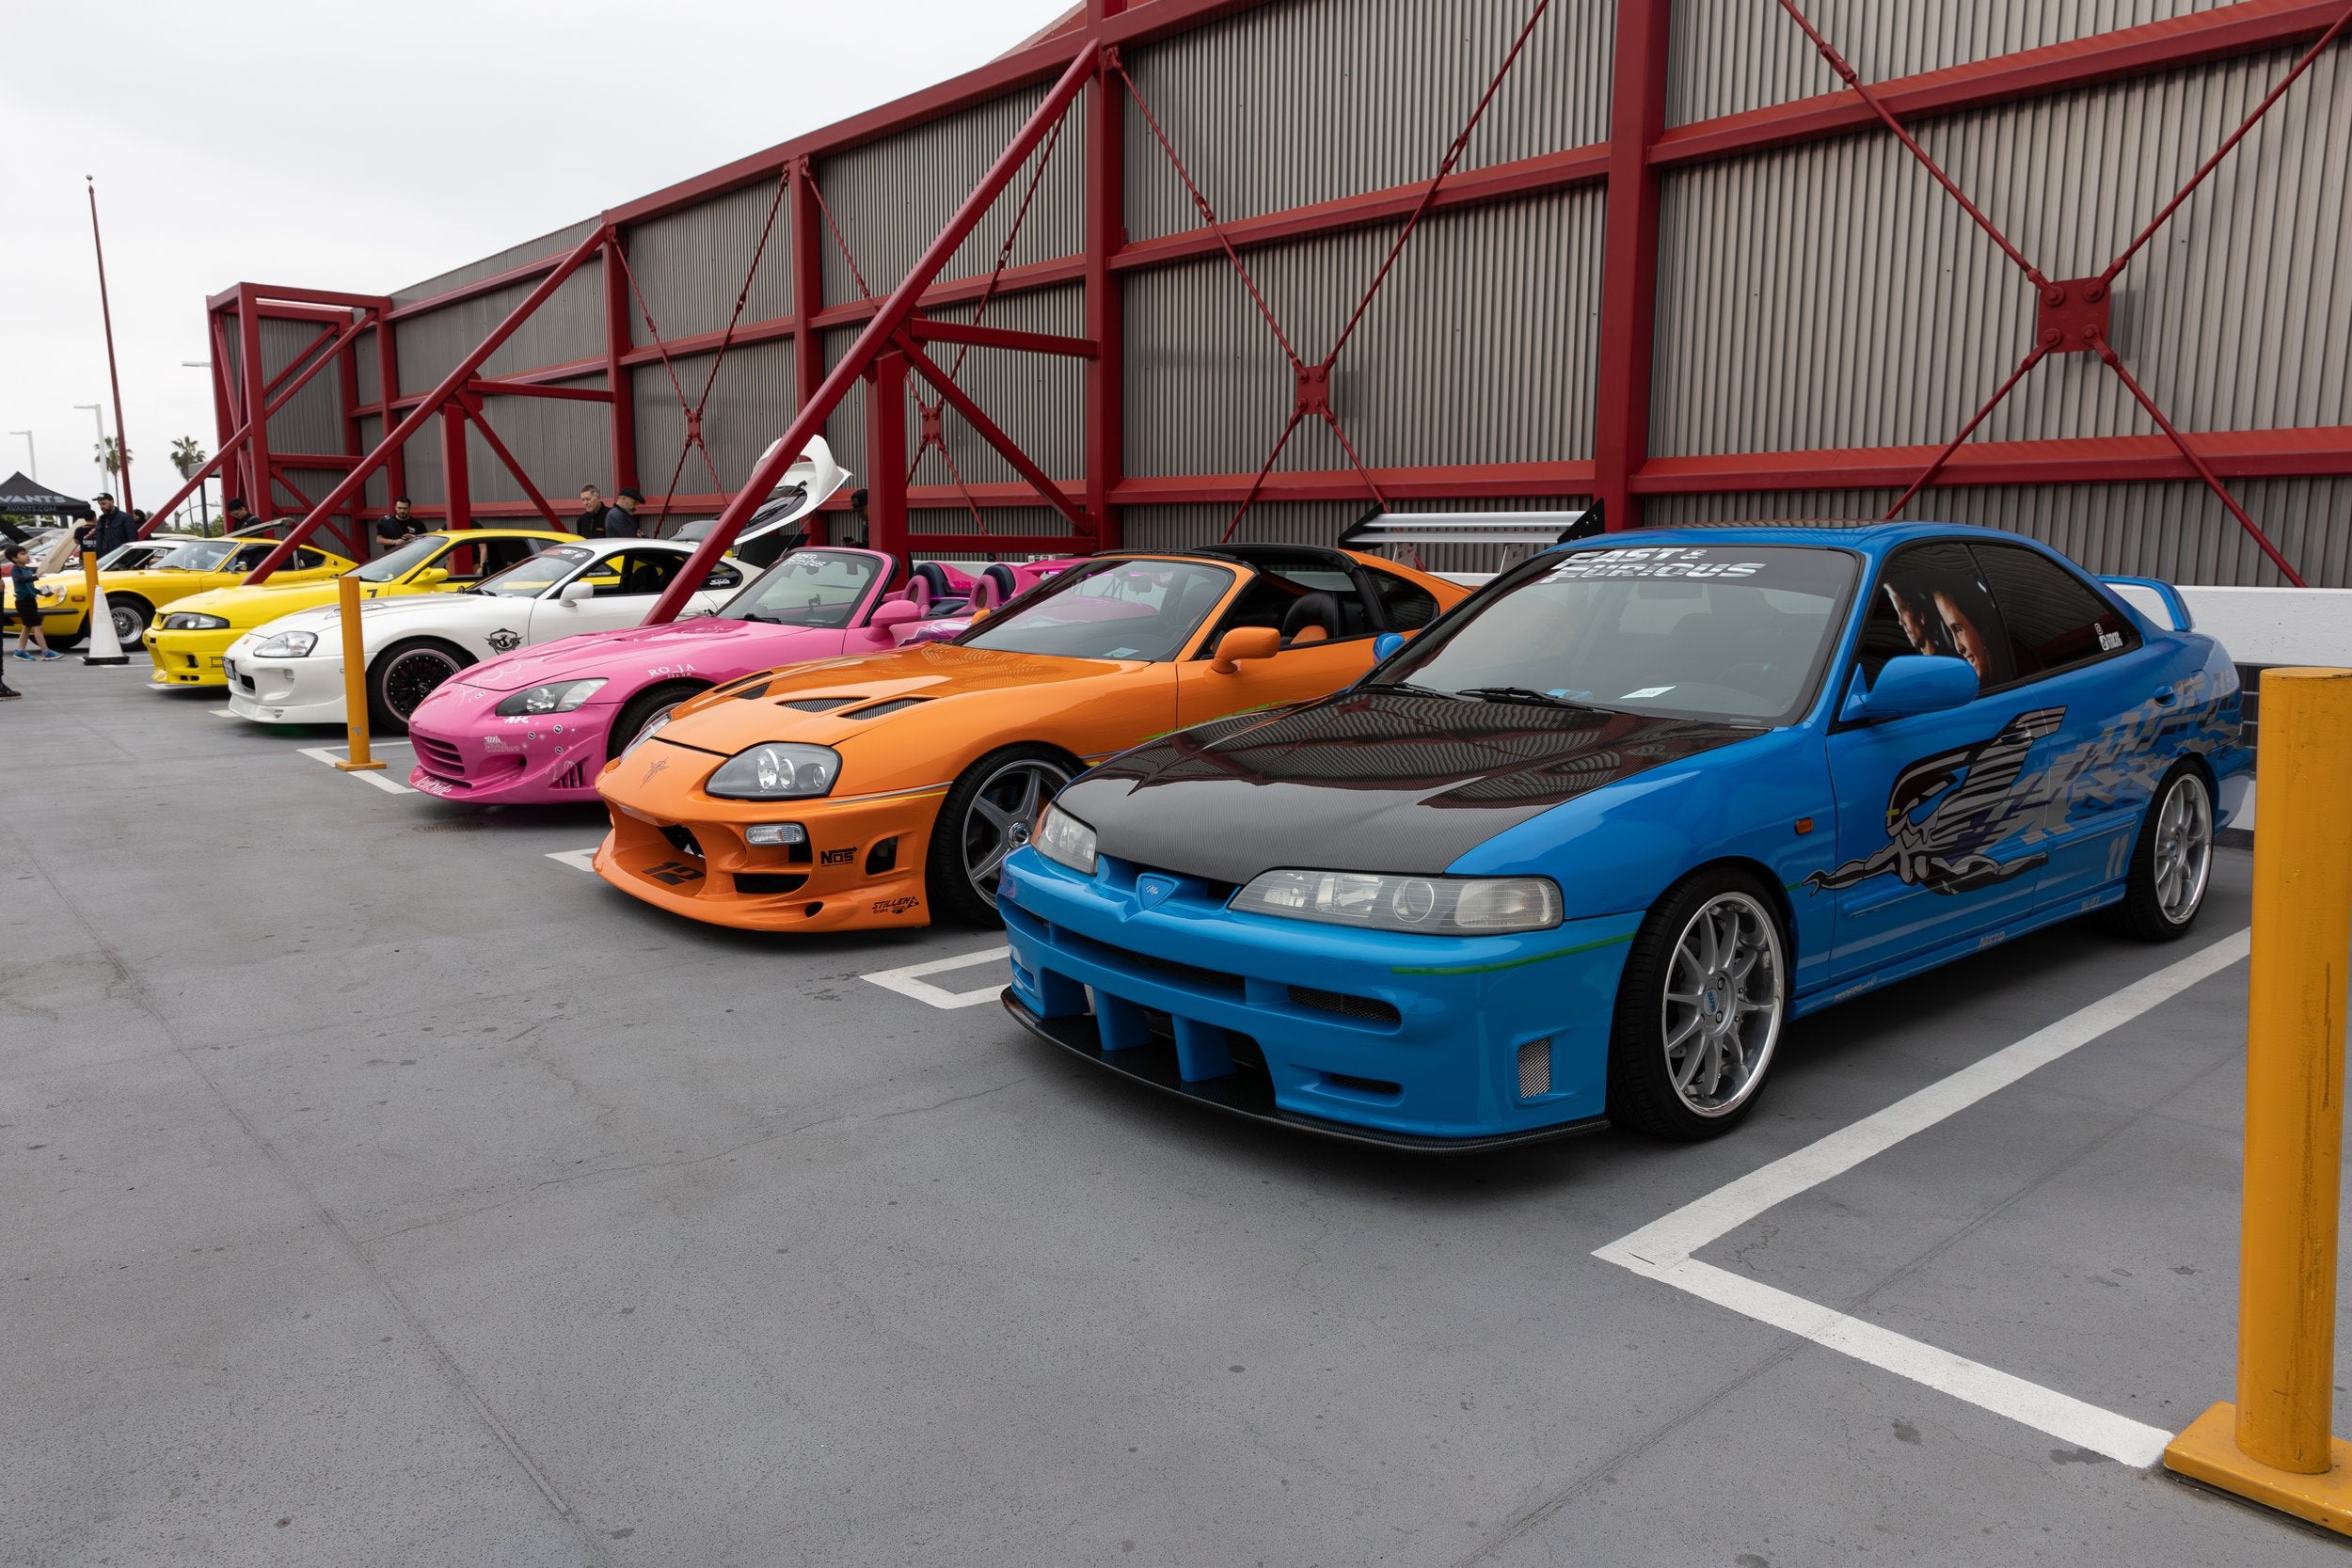 What Makes The Nissan Silvia A Great Drift Car? - JDM Export